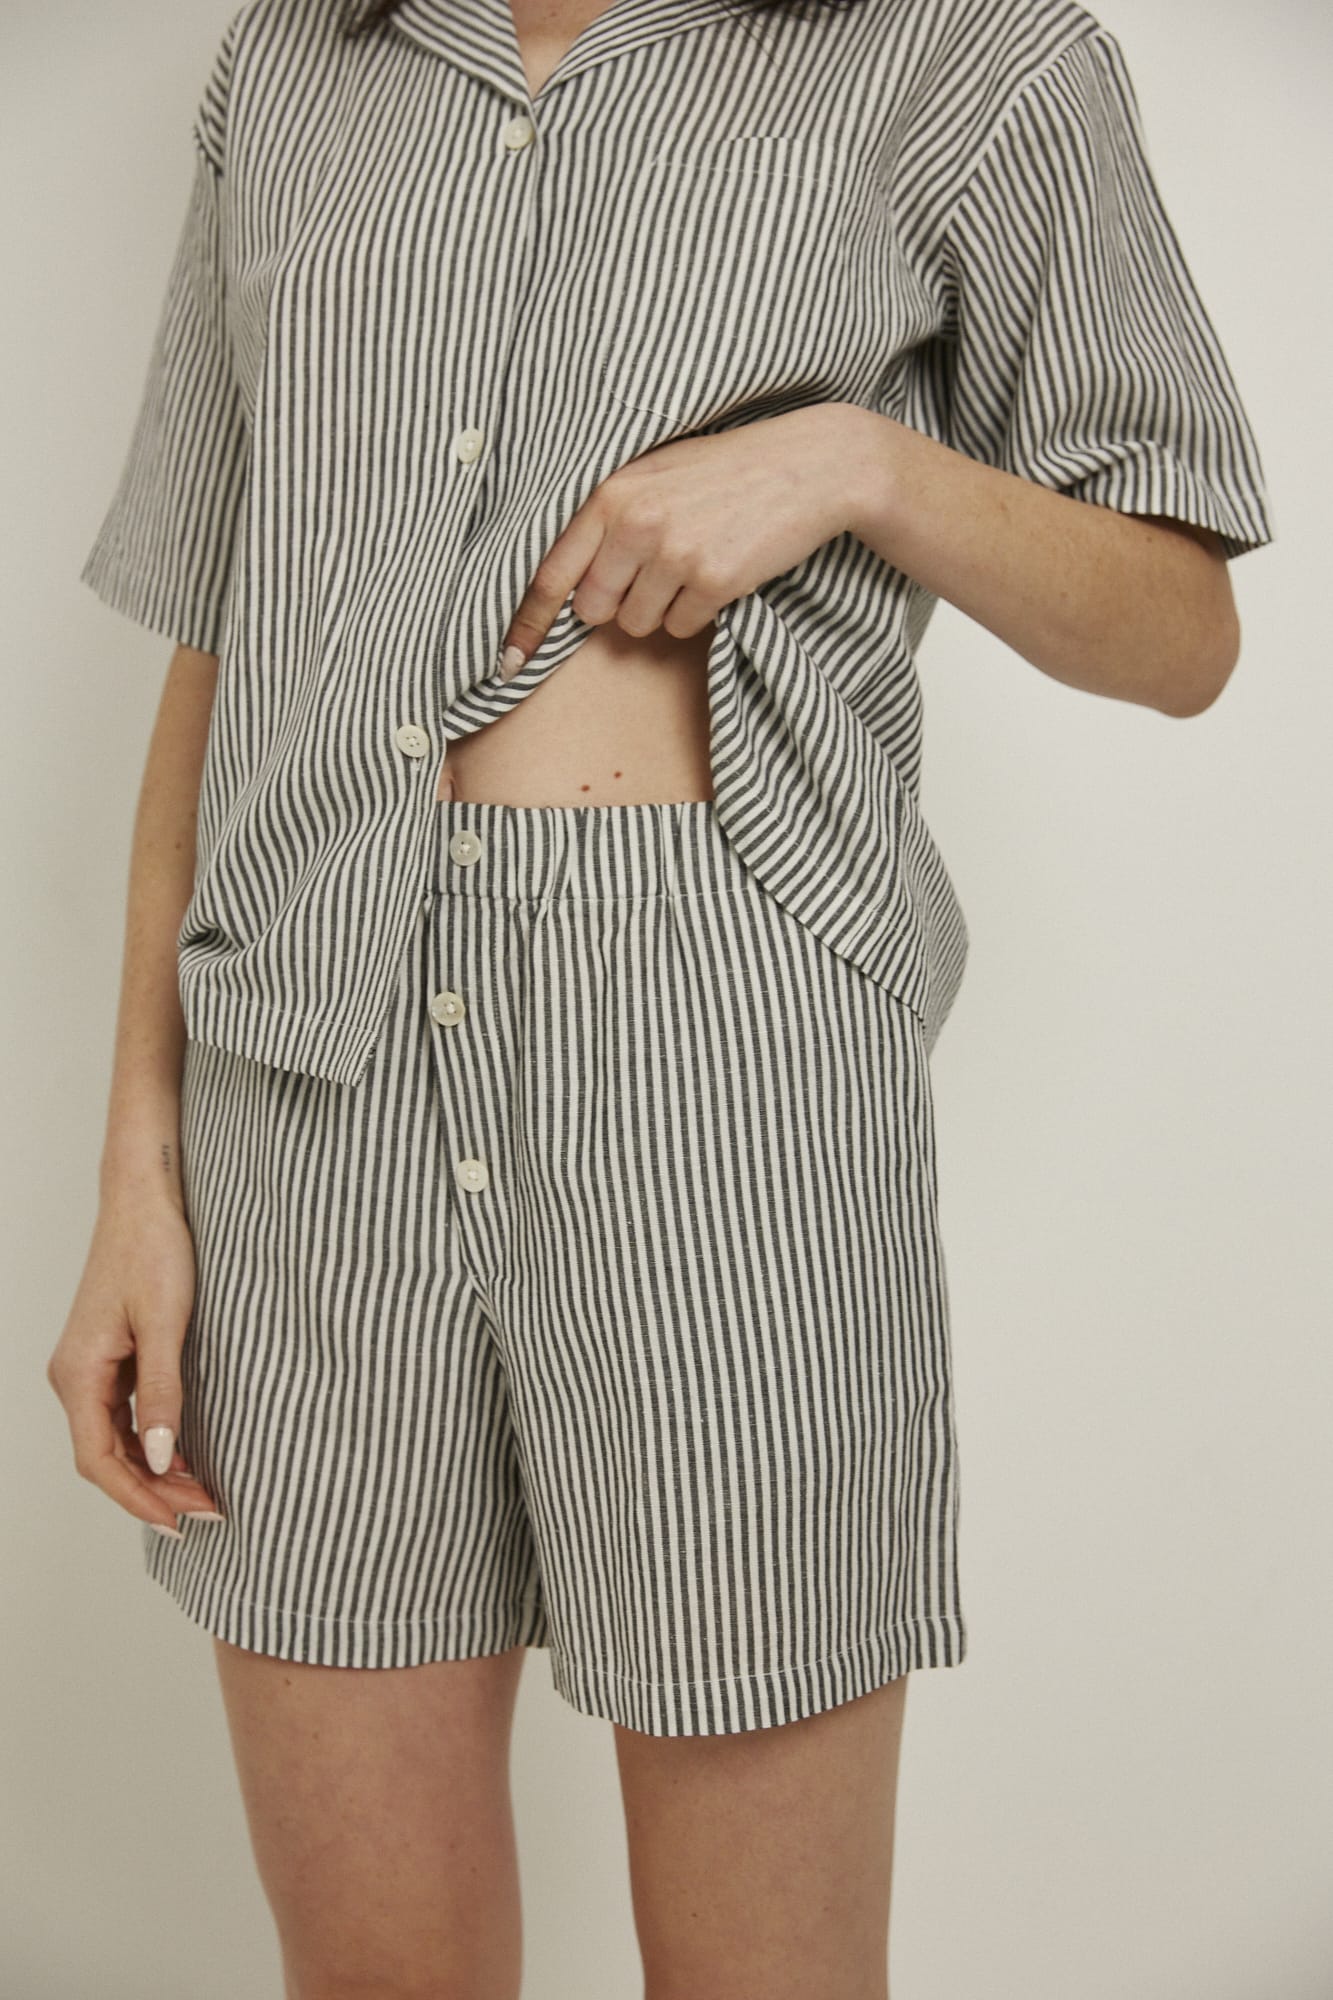 Women’s pyjama set including a short sleeve shirt and shorts. Made from an organic cotton and linen blend, in a black and white stripe.  The shirt has shell buttons, a front pocket and a back pleat with locker loop detail.  The shorts feature natural shell buttons and an elasticated waistband for comfort.